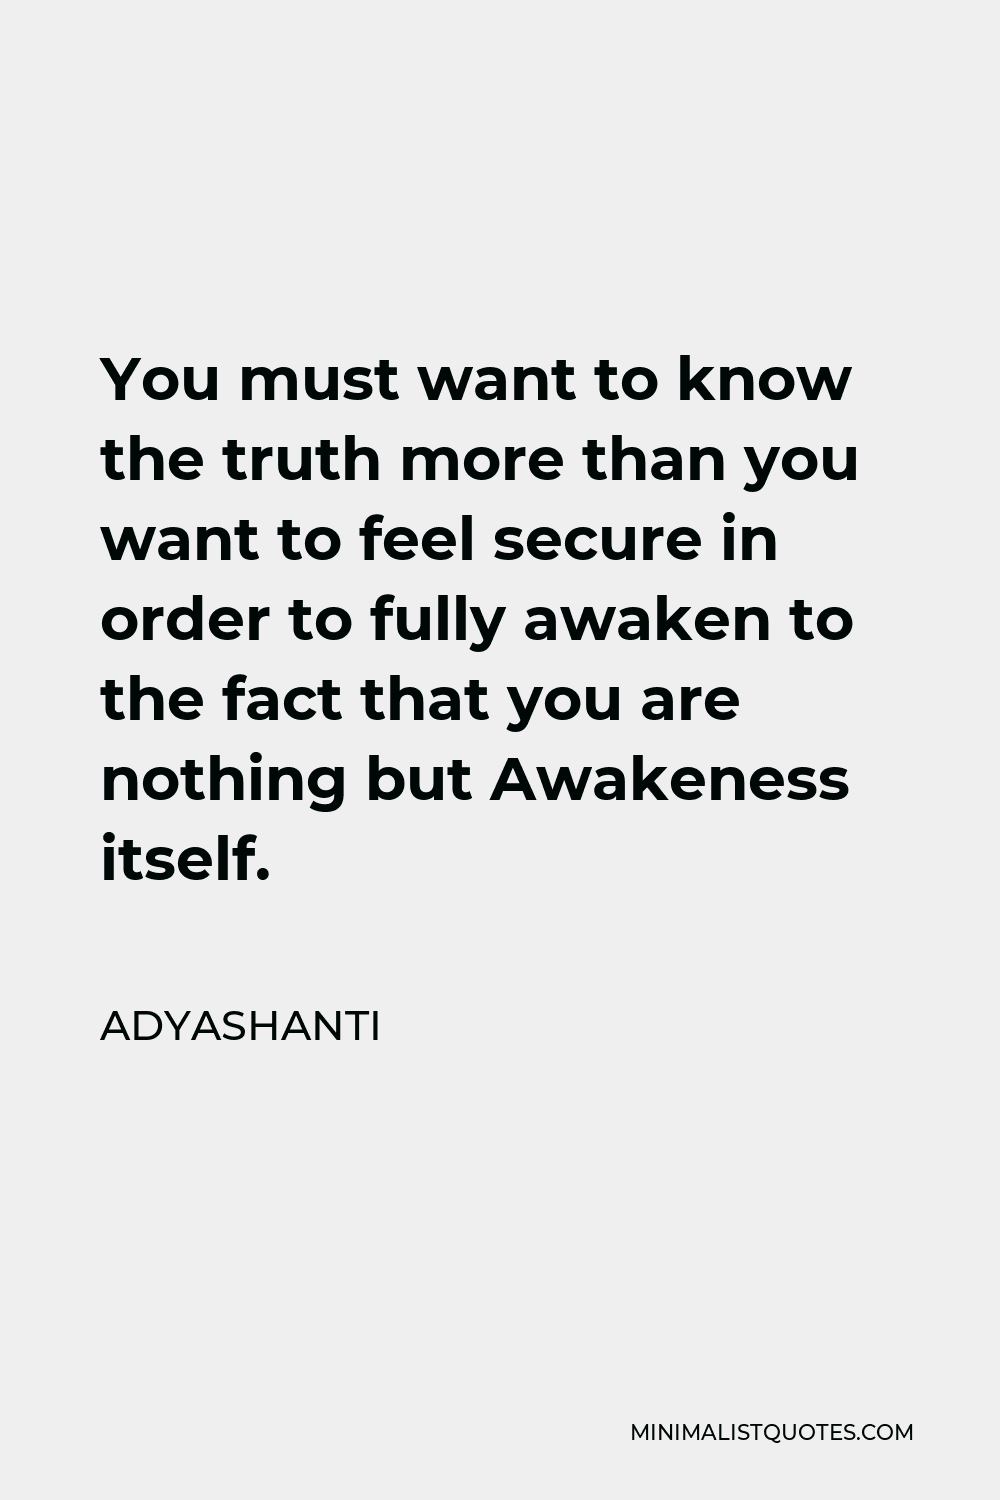 Adyashanti Quote - You must want to know the truth more than you want to feel secure in order to fully awaken to the fact that you are nothing but Awakeness itself.